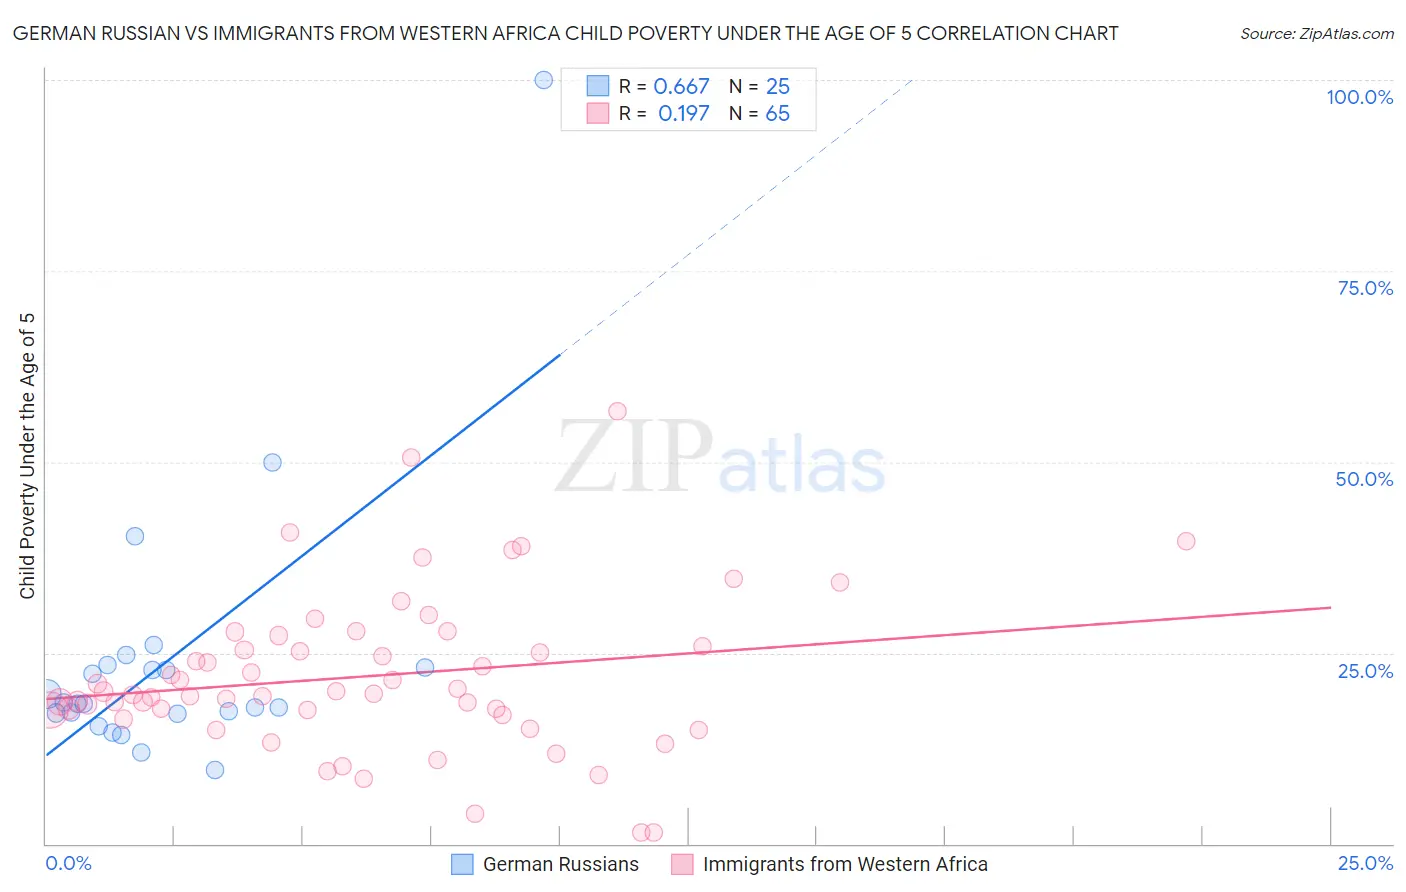 German Russian vs Immigrants from Western Africa Child Poverty Under the Age of 5